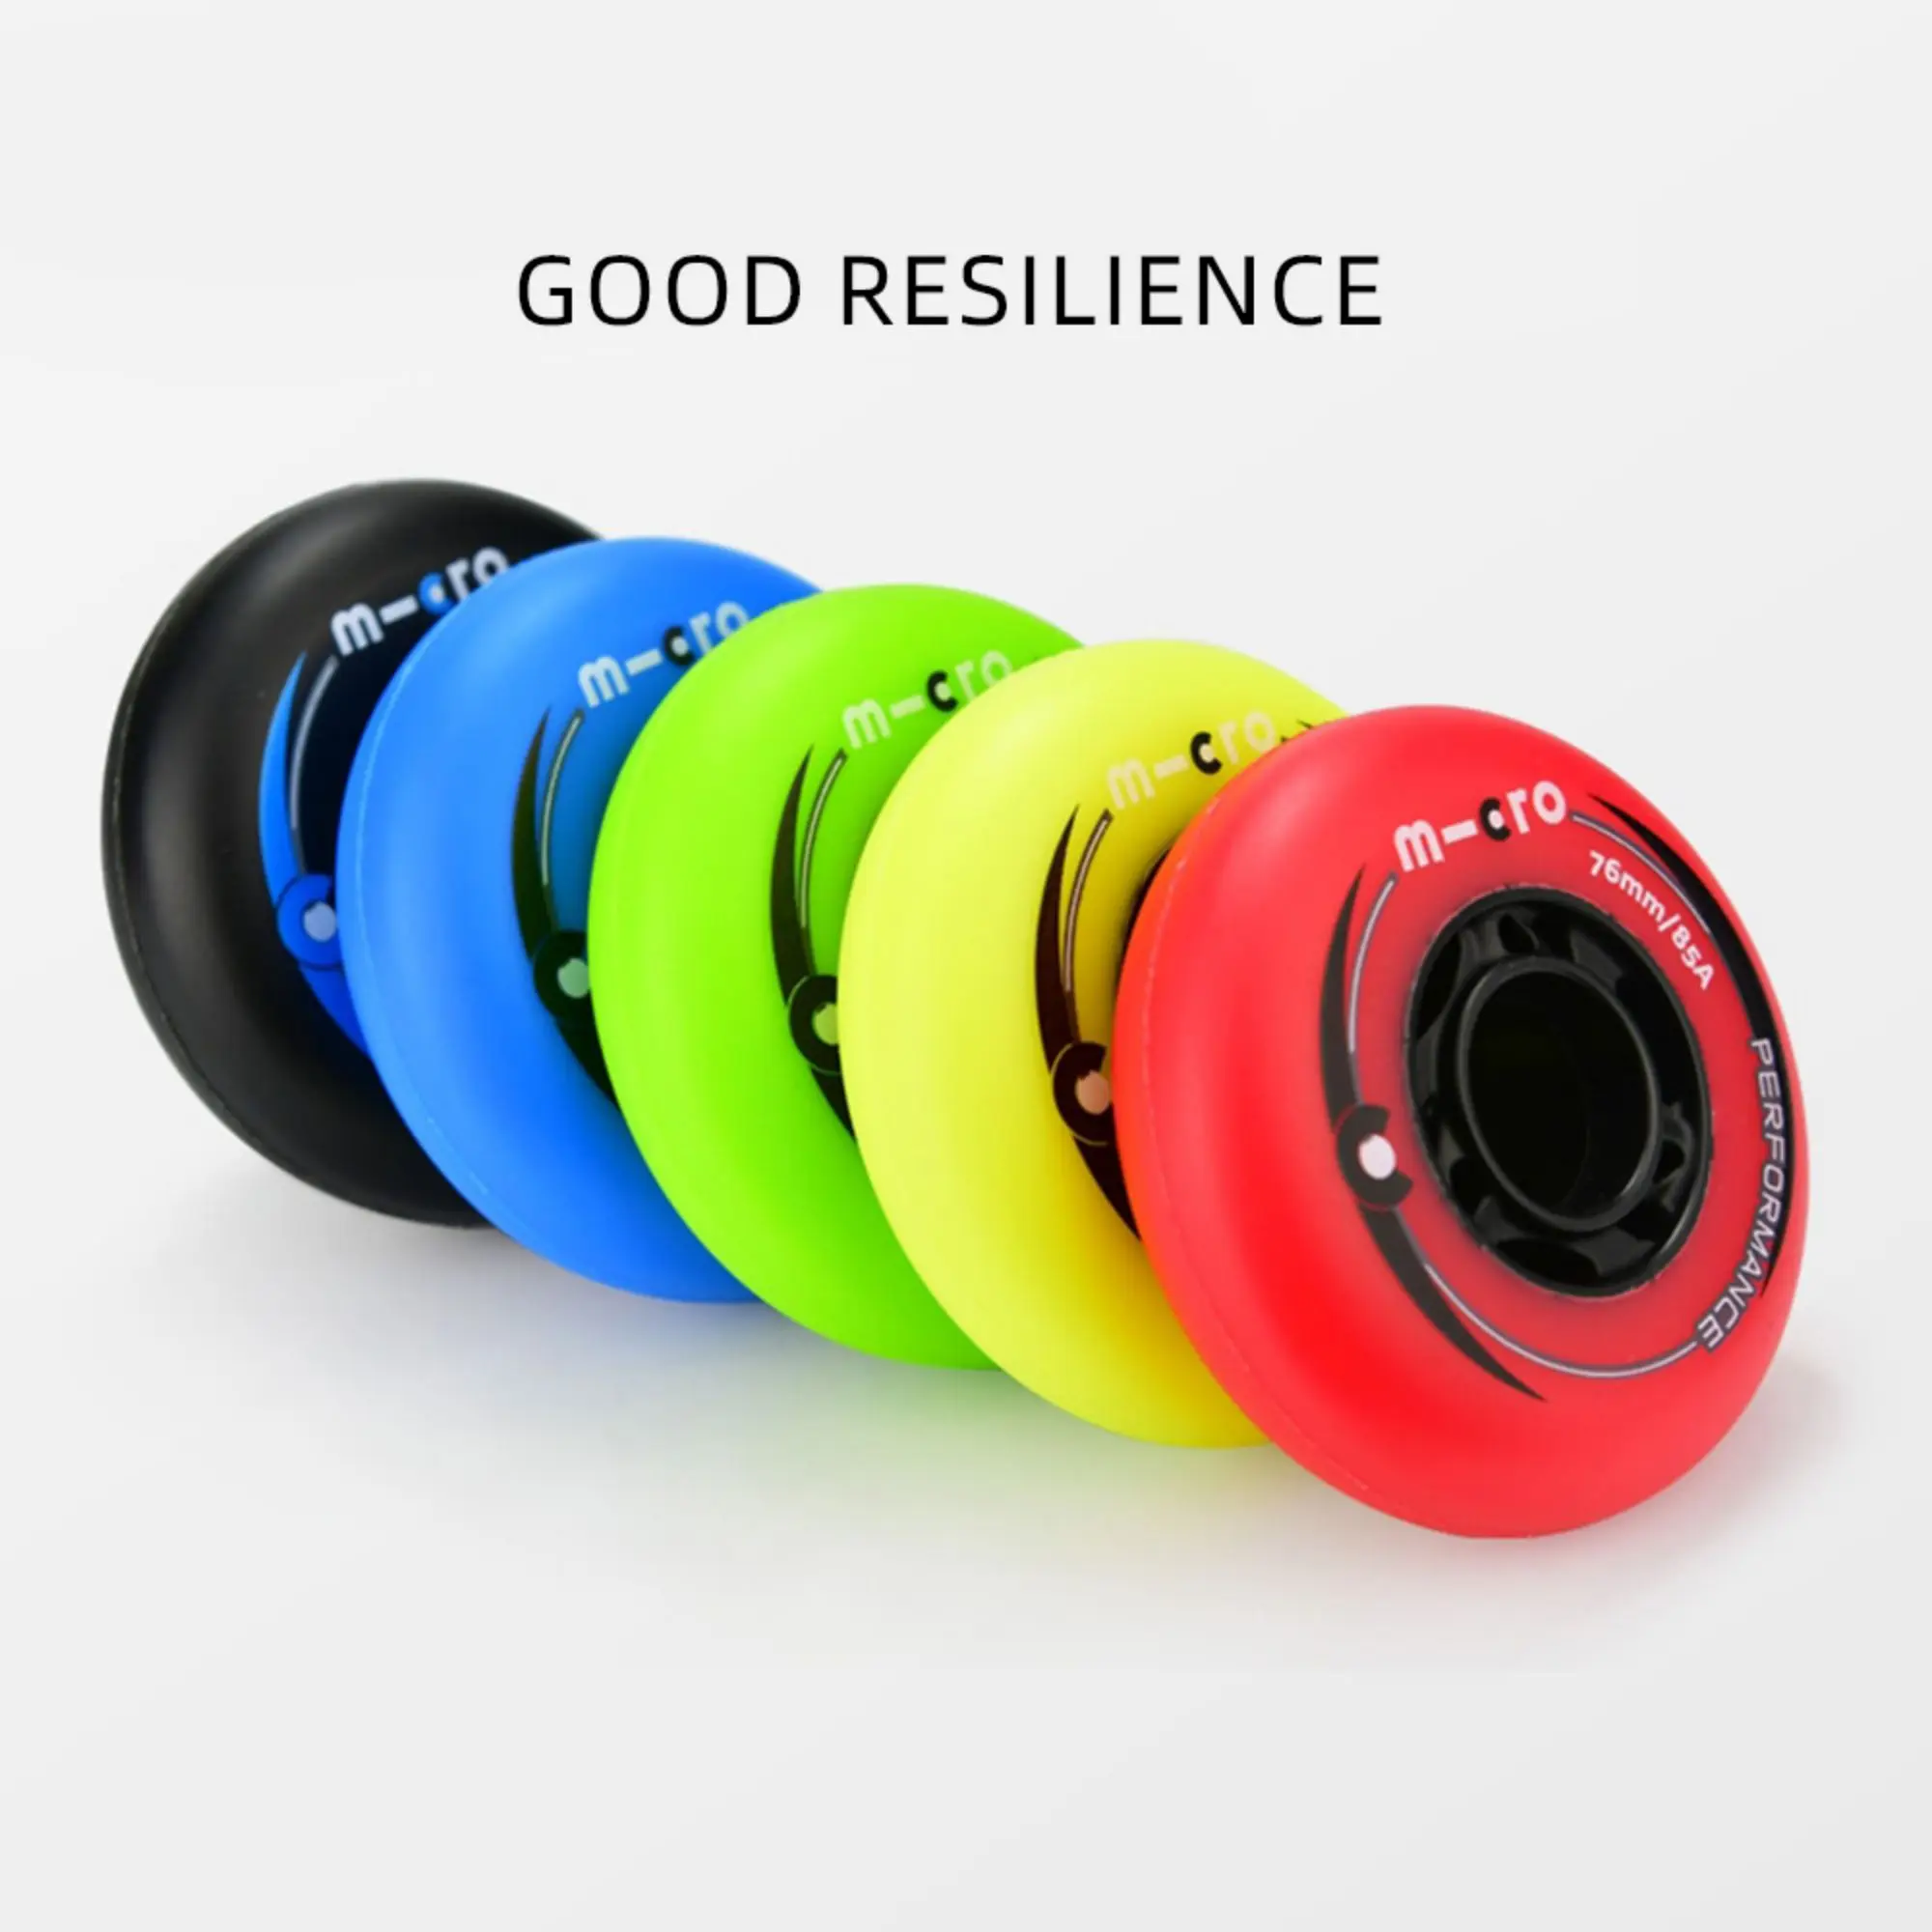 4PCS 76/80mm 3.15Inch 85A Colorful Thick PU Wheel for Slalom Skates, Freestyle Skate Wheels,